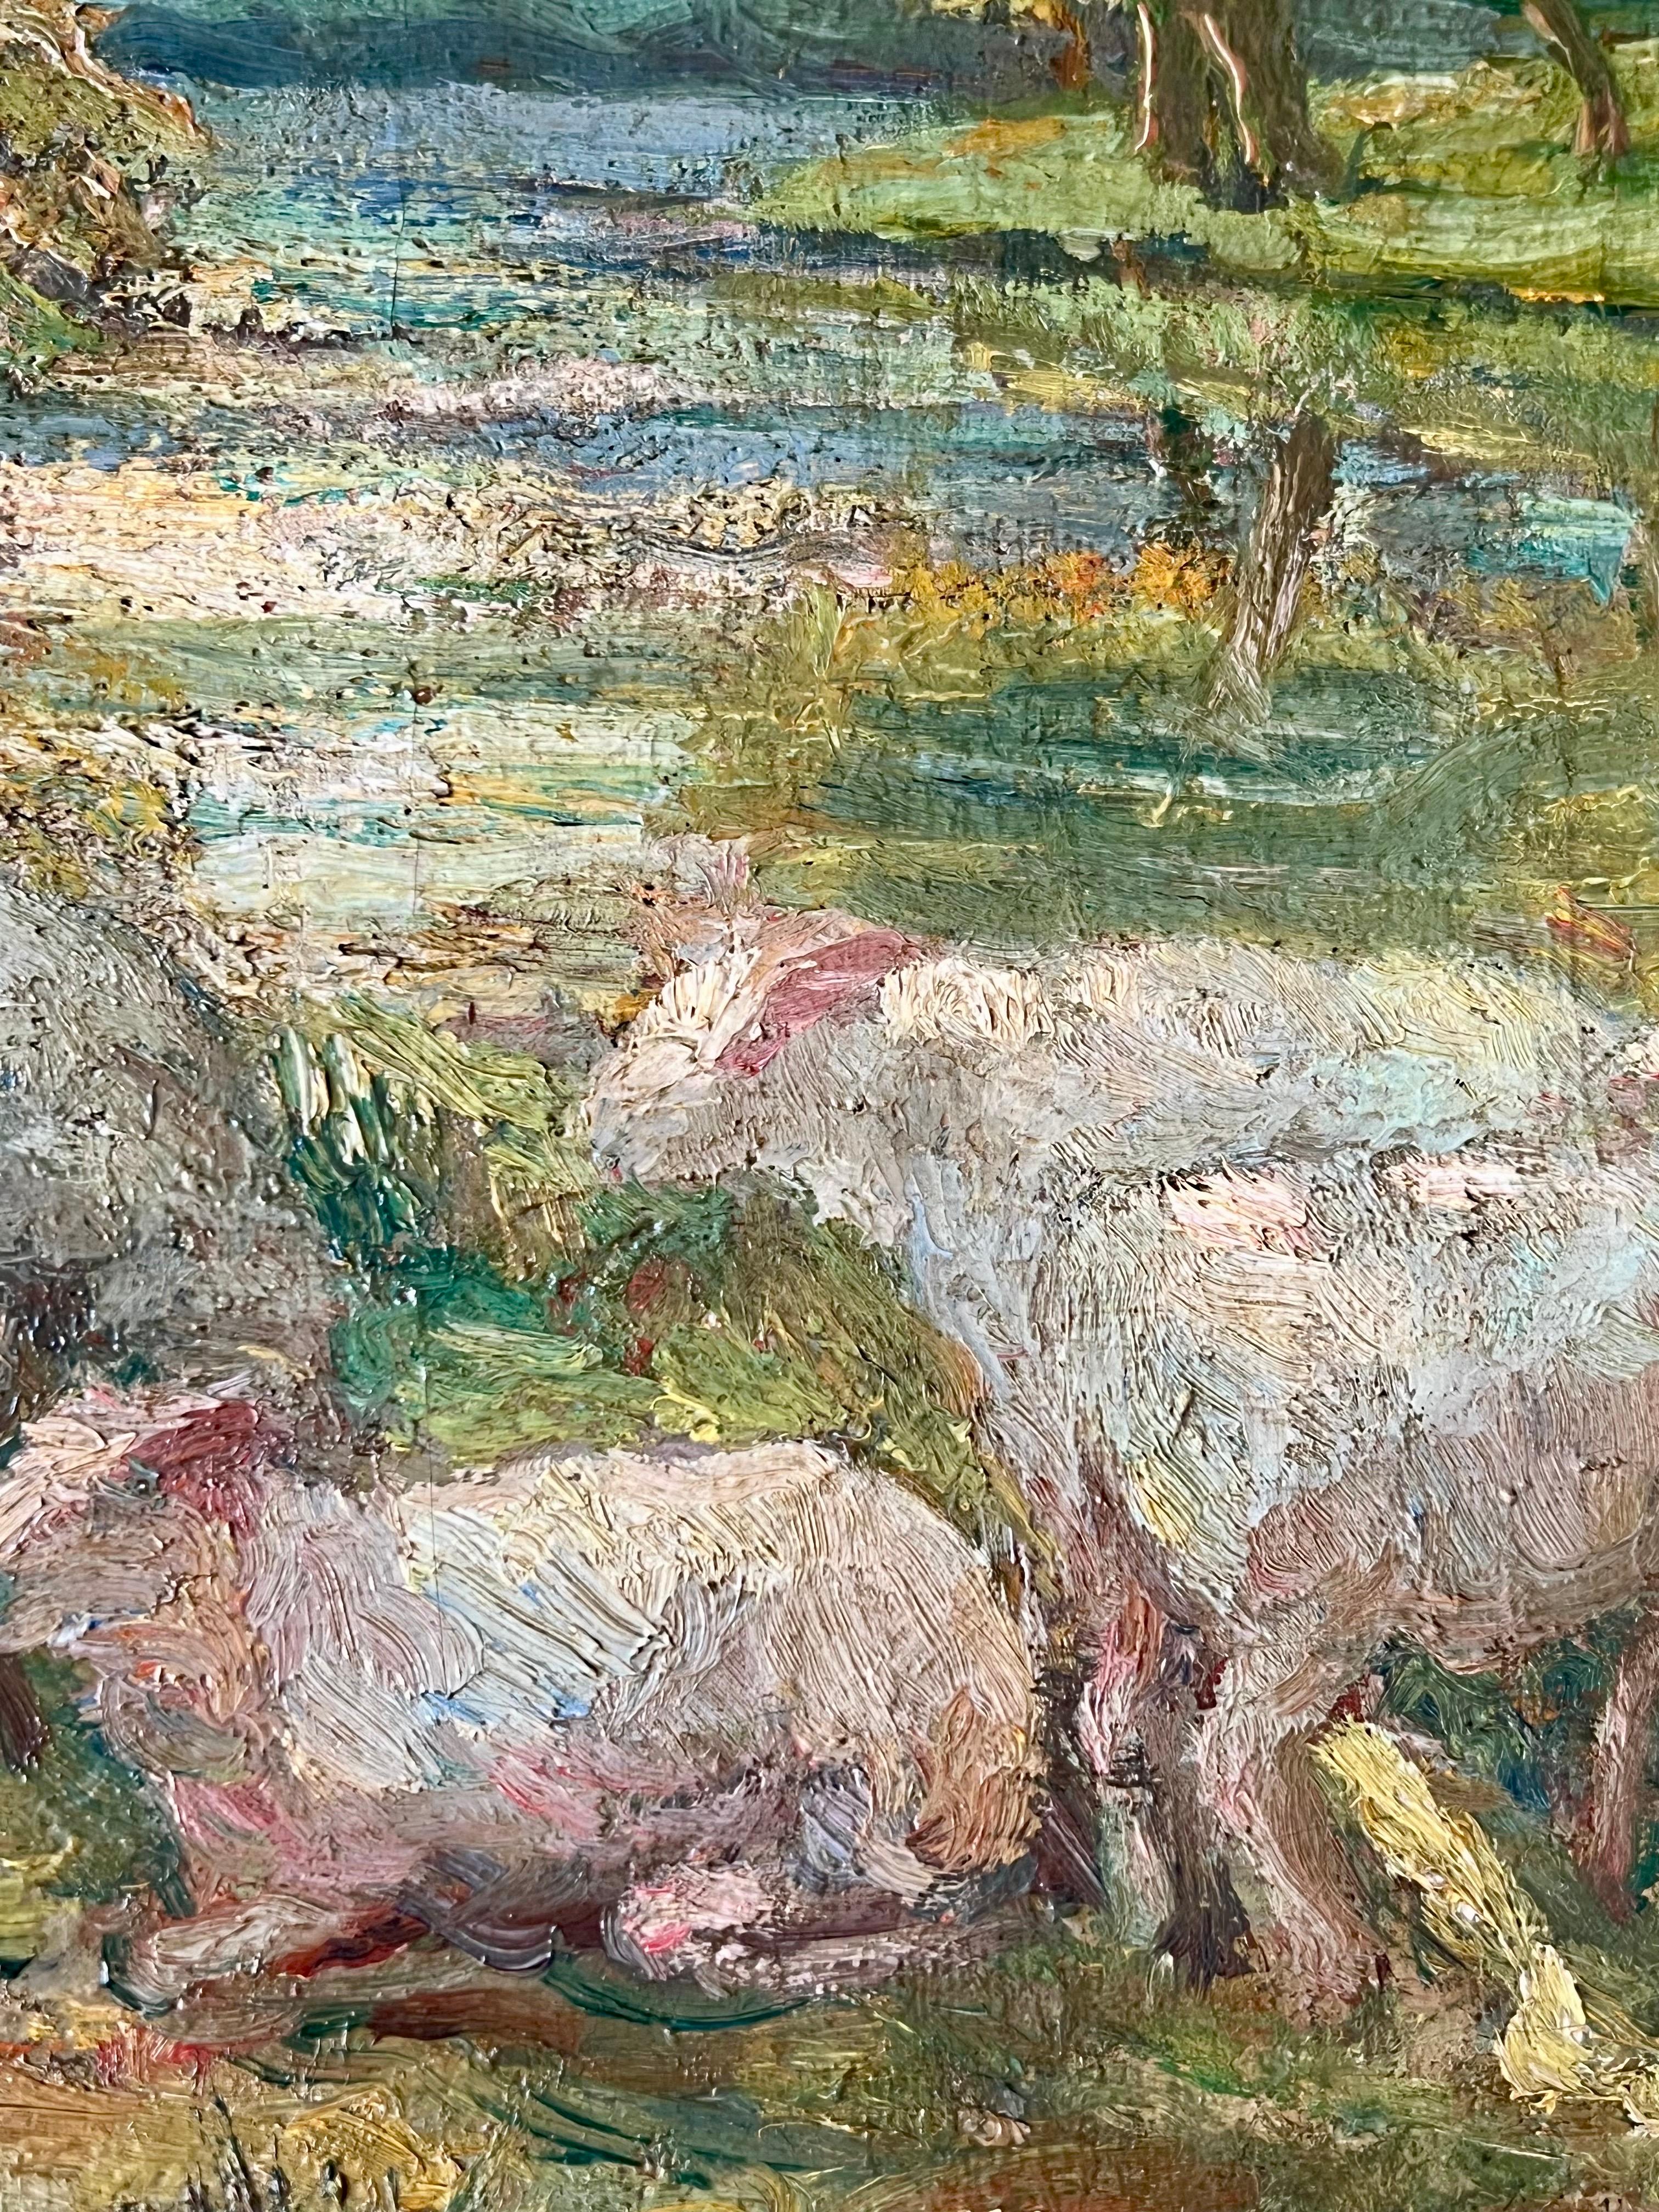 19th century impressionist painting, capturing a beautiful day in the countryside.

A young girl can be seen standing in front of her flock in the lush and beautiful countryside. A small stream flows through the forest in the background. The present